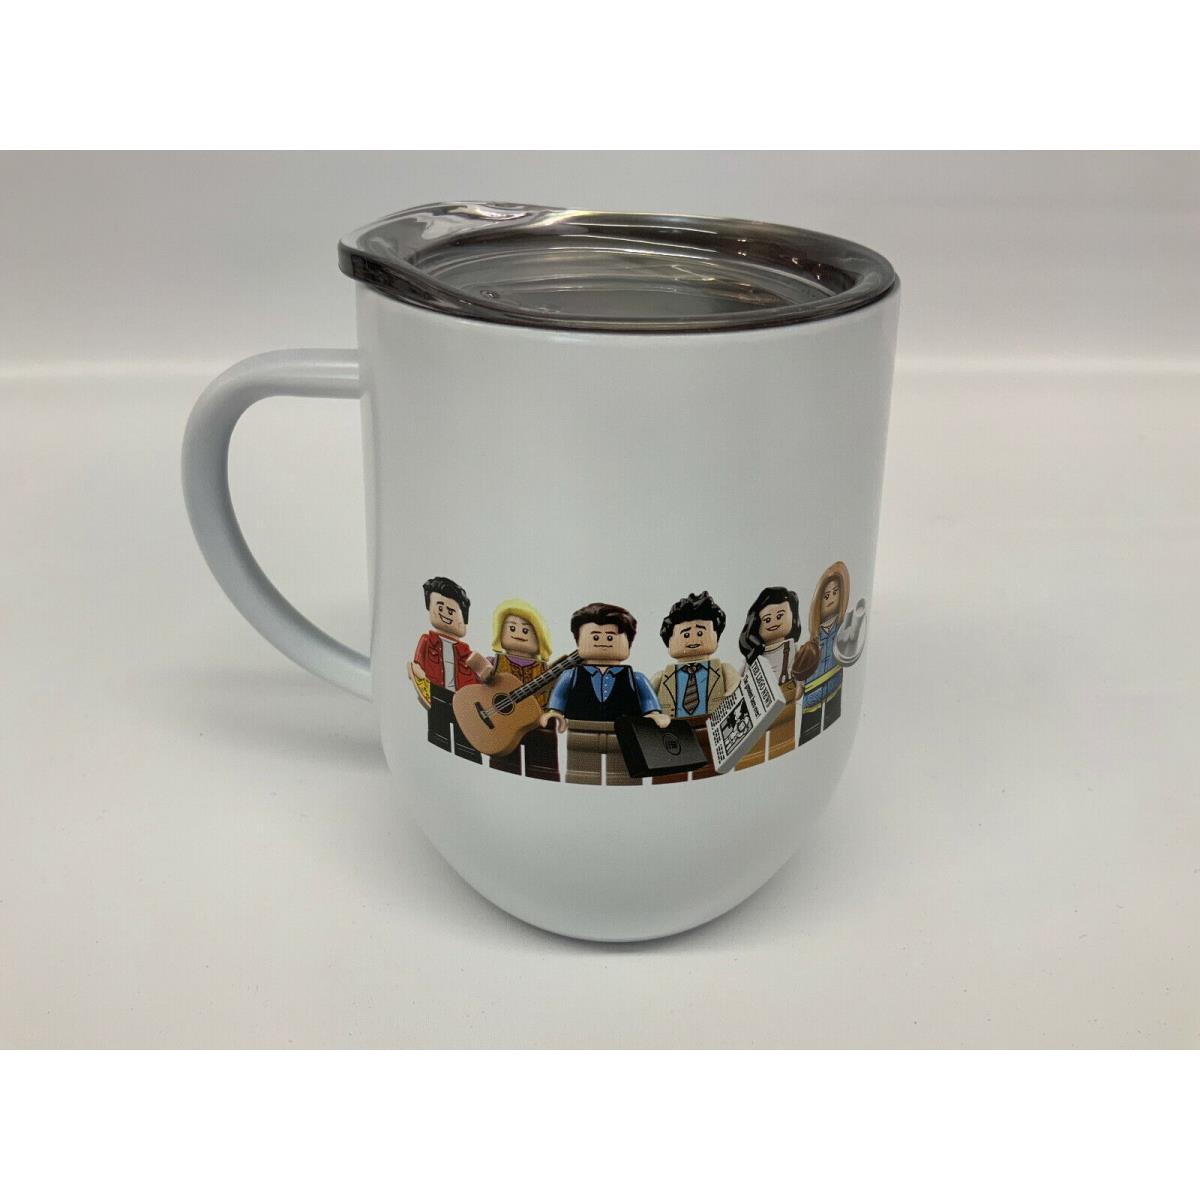 Lego Friends TV Series Central Perk Coffee Mug Cup w Lid Limited Edition